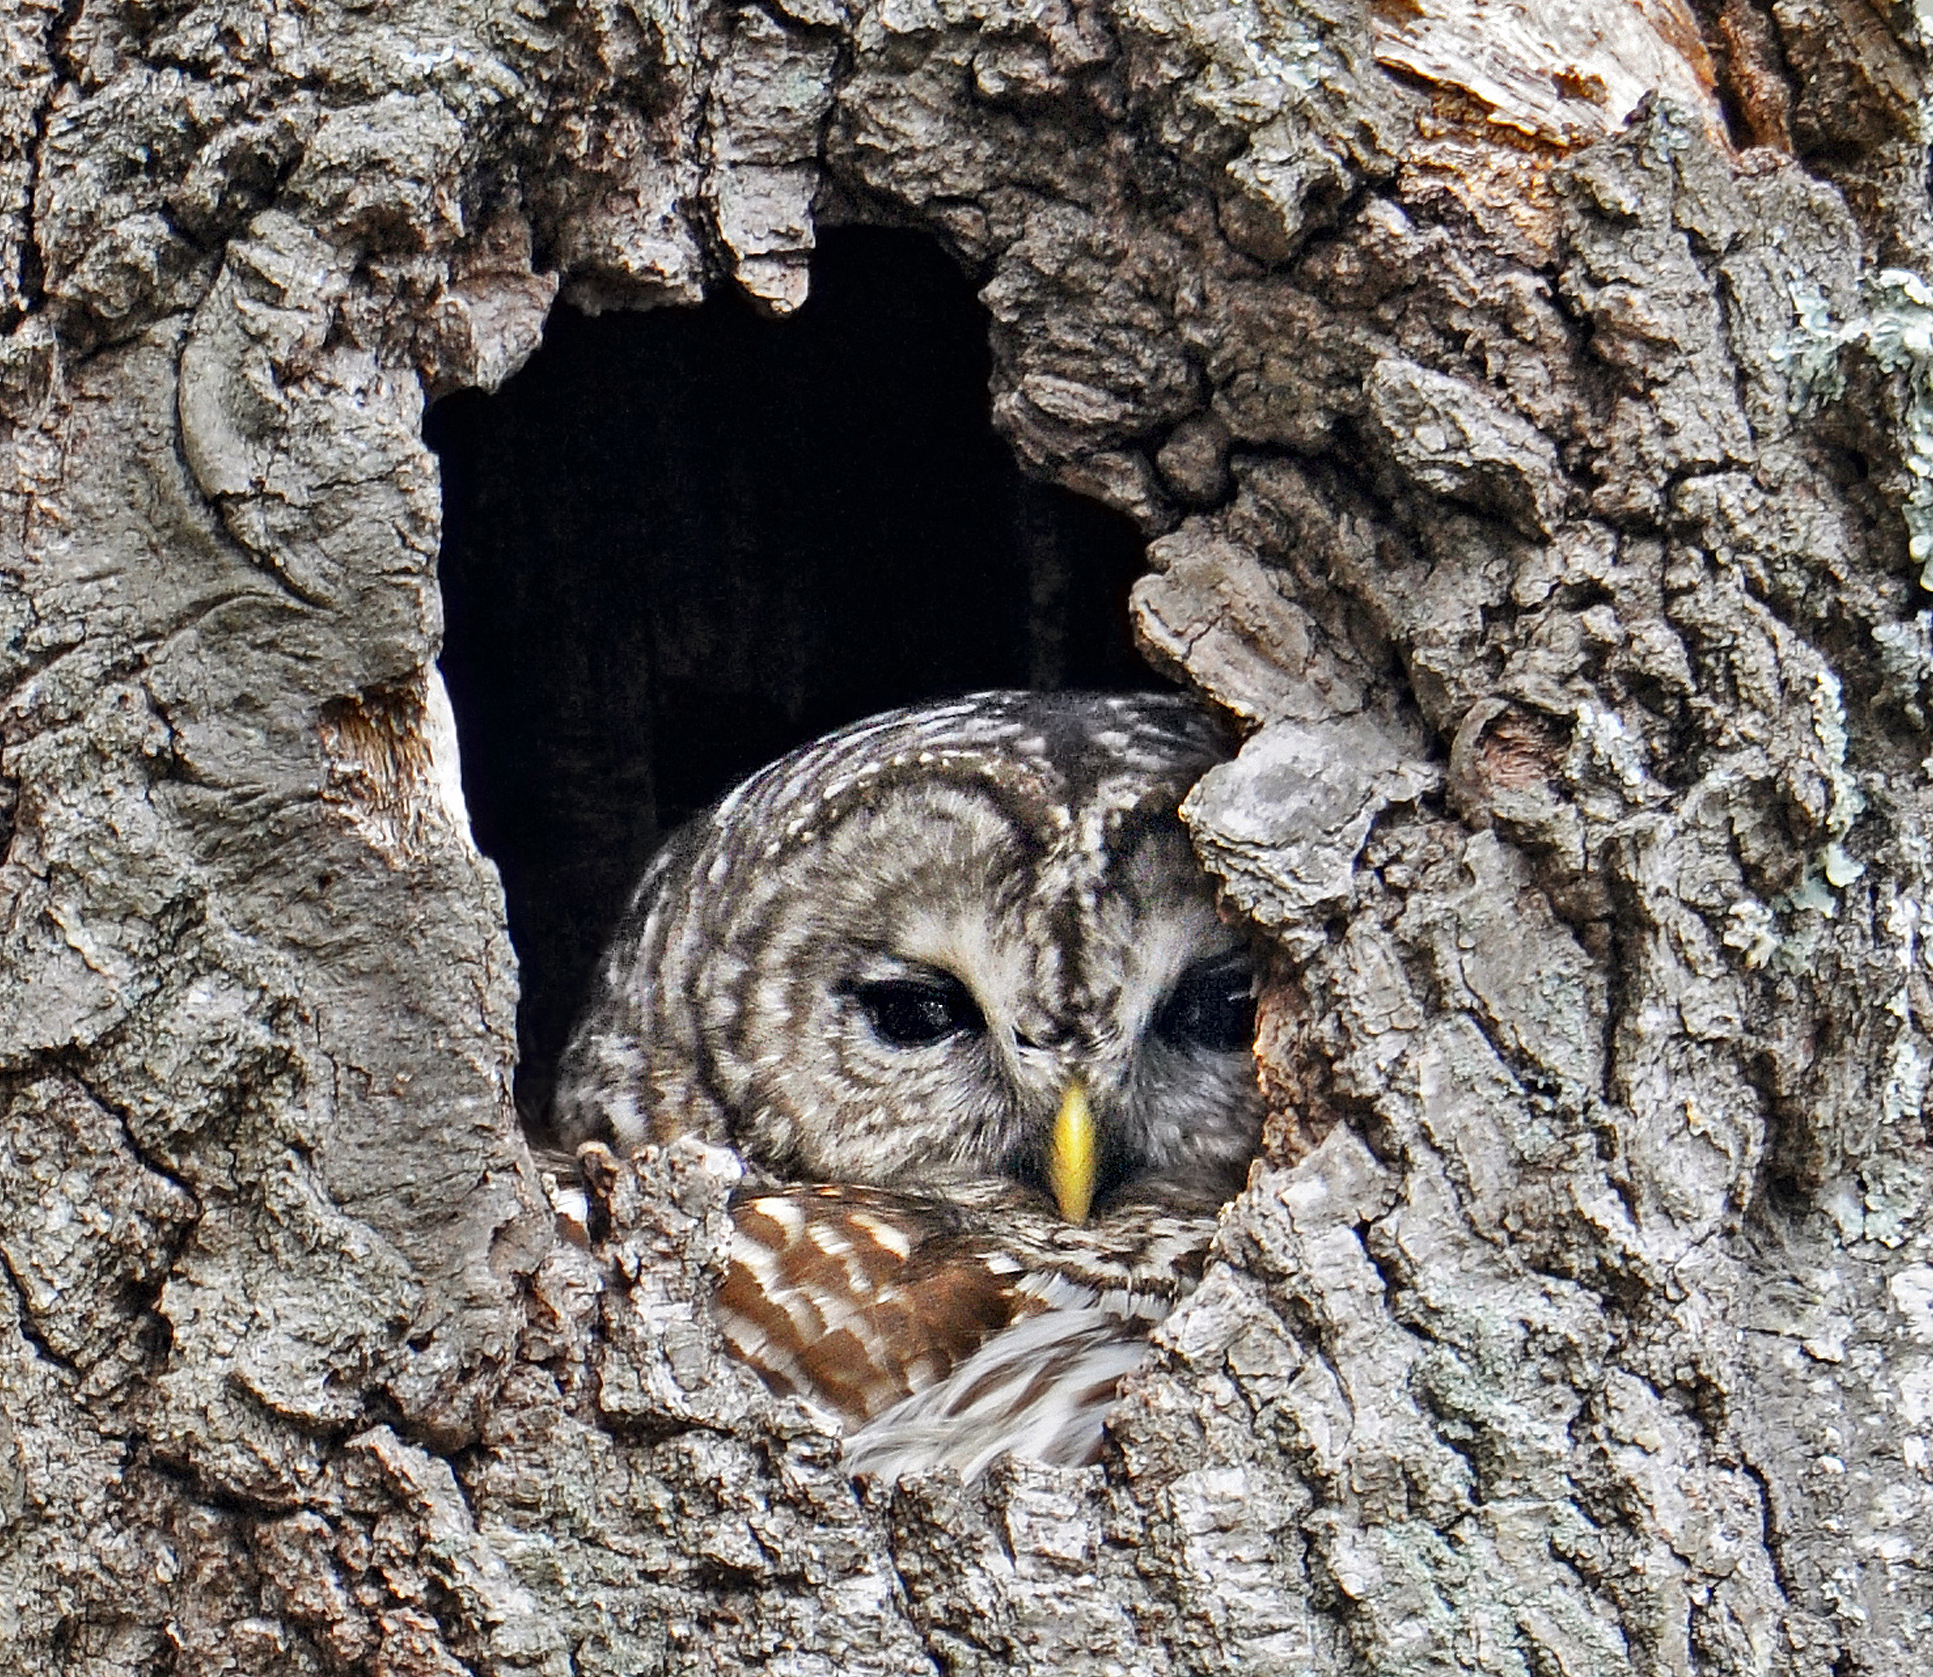 A Barred Owl peers out from a tree cavity. (photo © Mark Wilson / Eyes on Owls)